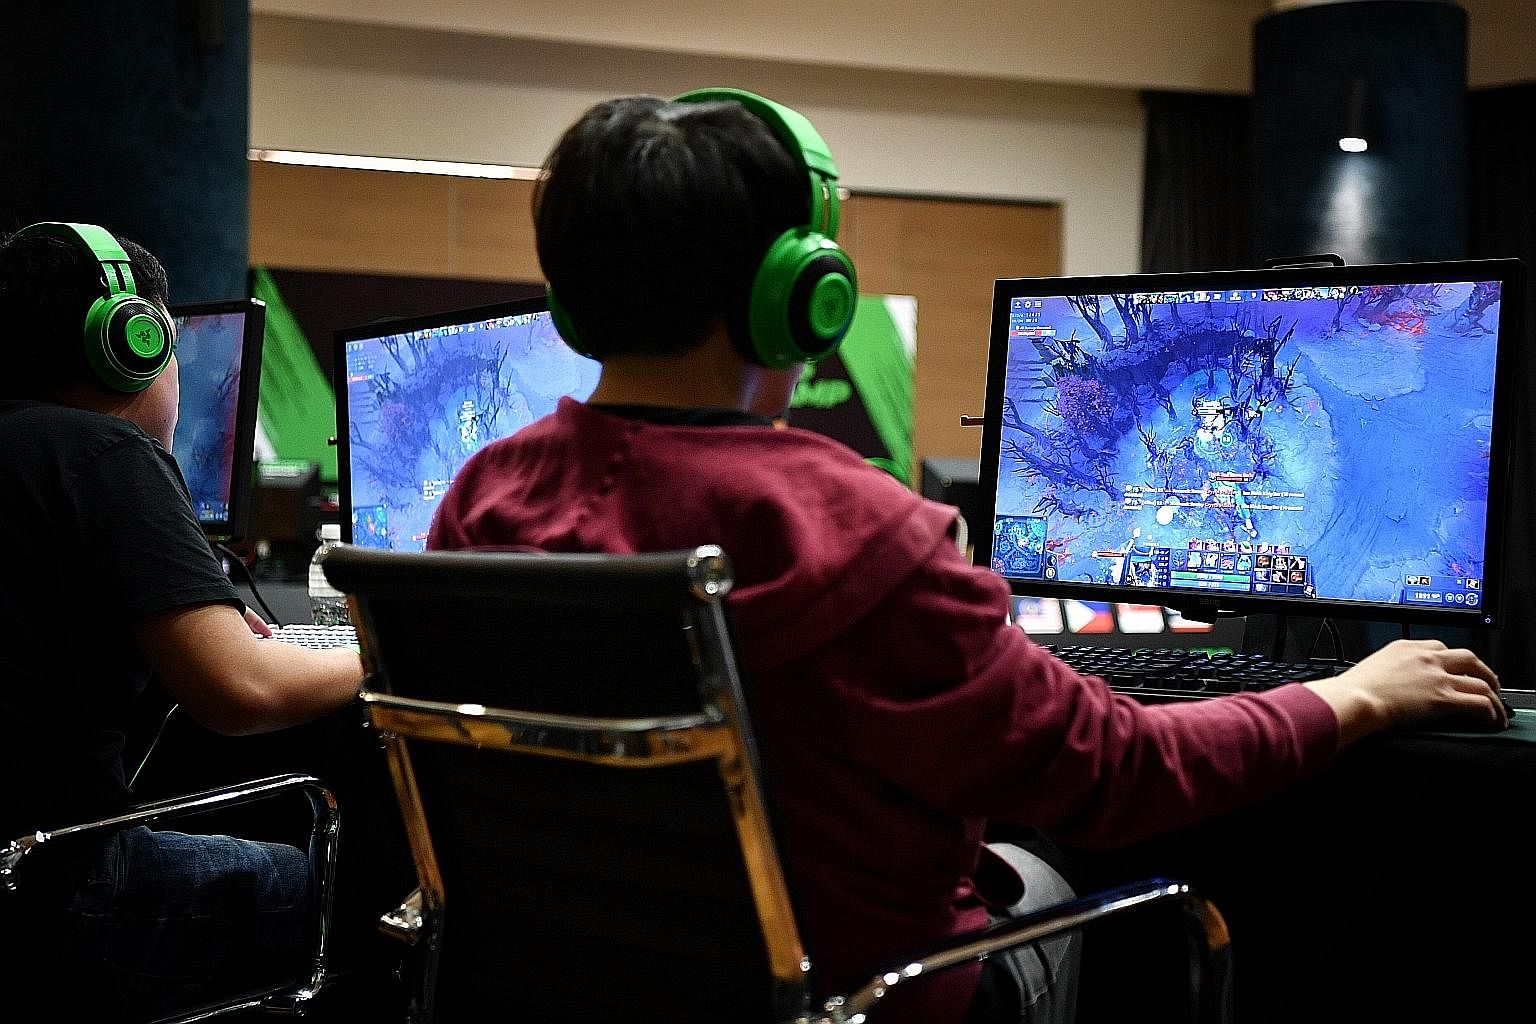 With record numbers of people under lockdown and cooped up at home, e-sports has had a captive audience with a record demand for video games such as Dota 2 (above) that, like most sports, requires teamwork and strategy. E-sports also became the only 